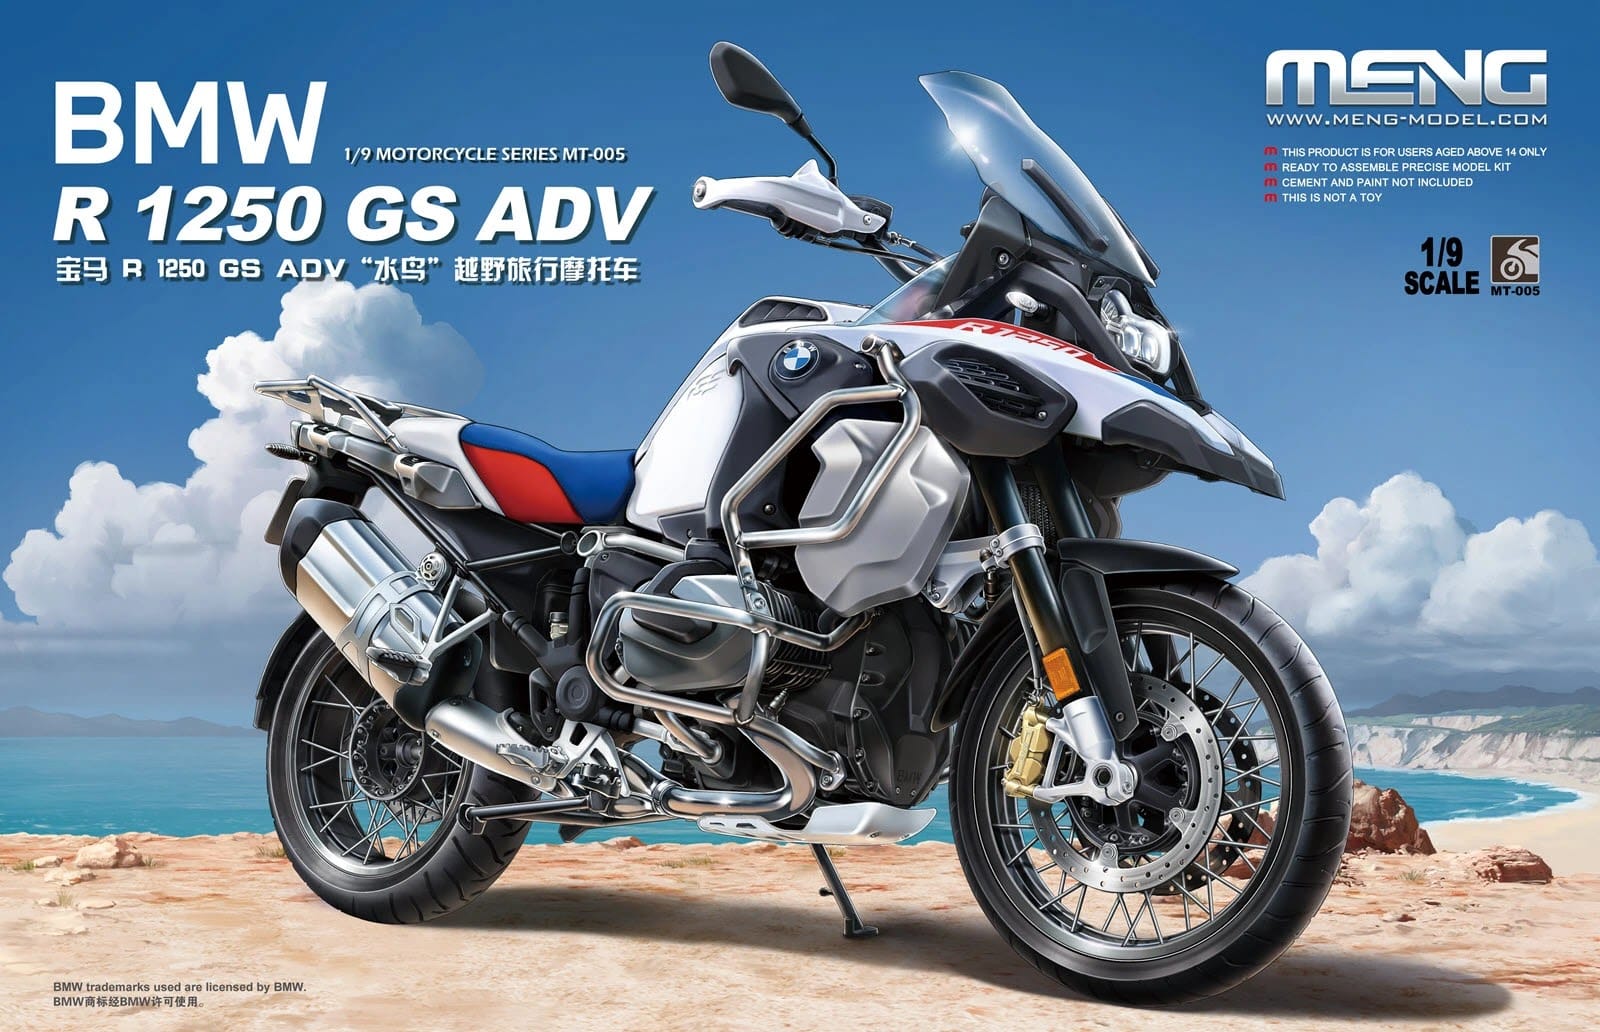 Preview: BMW R 1250 GS ADV from Meng Models in 1/9th scale